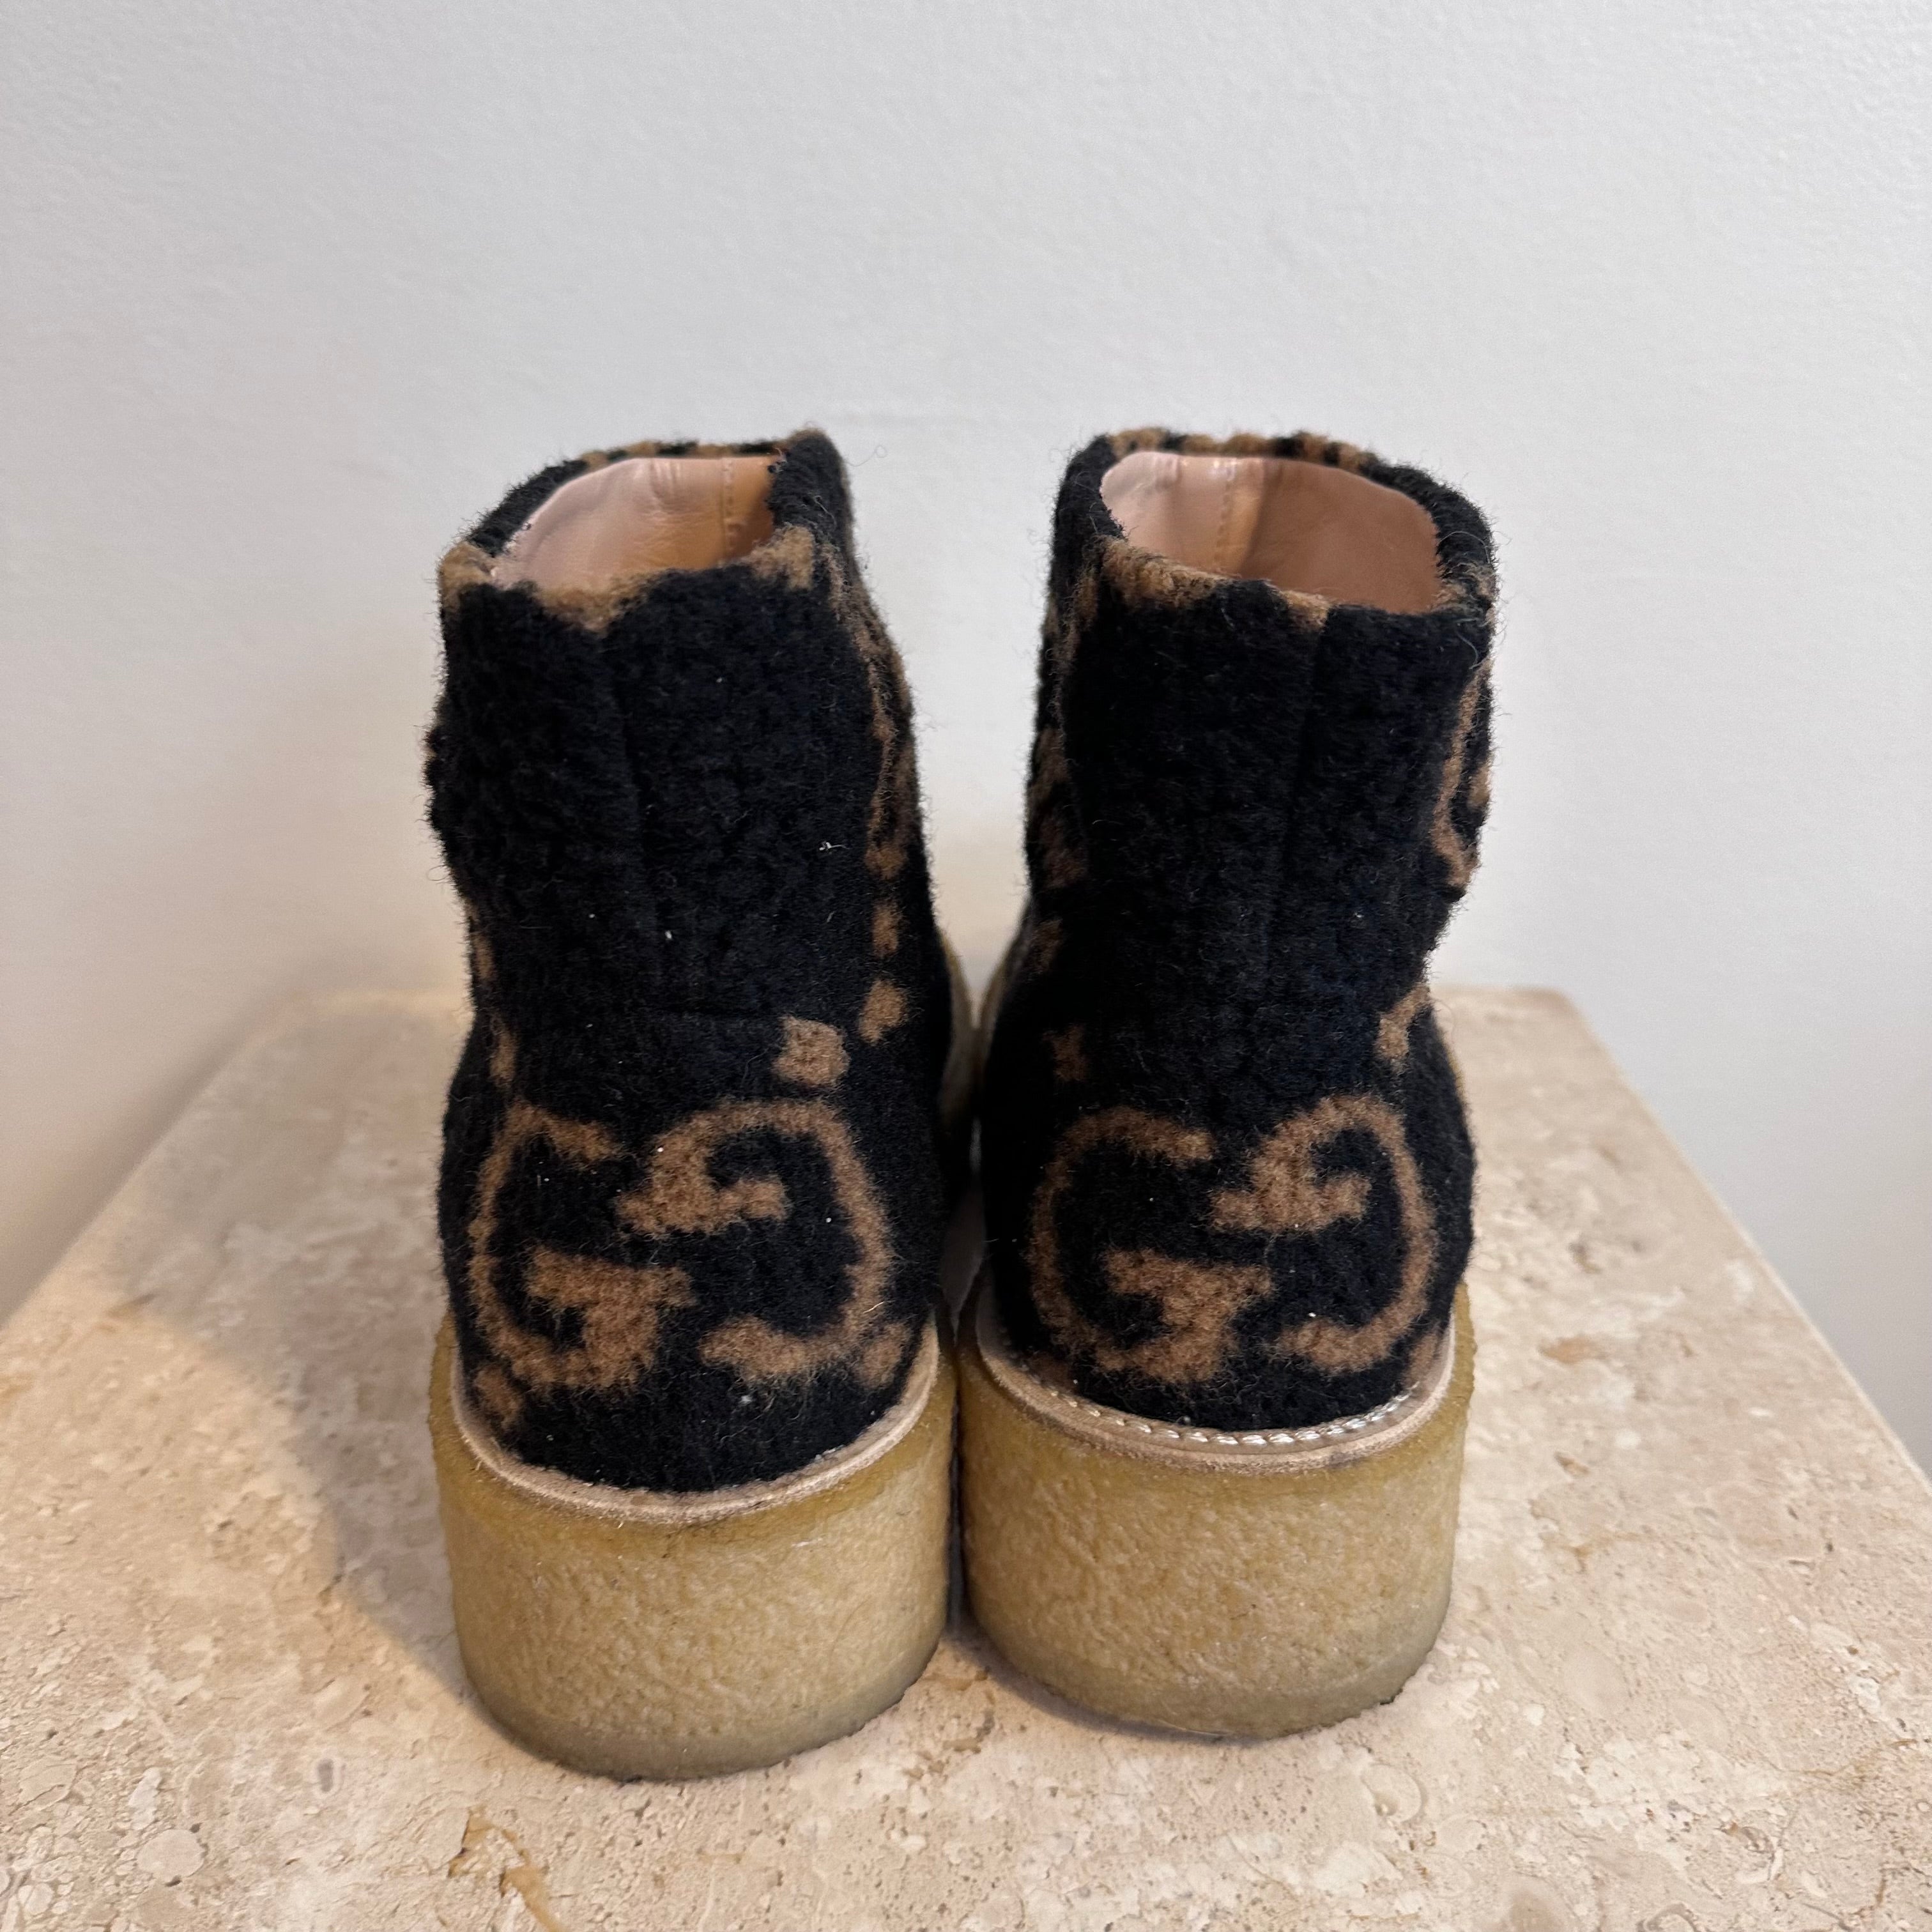 Pre-Owned GUCCI Shearling Boots Size 38.5